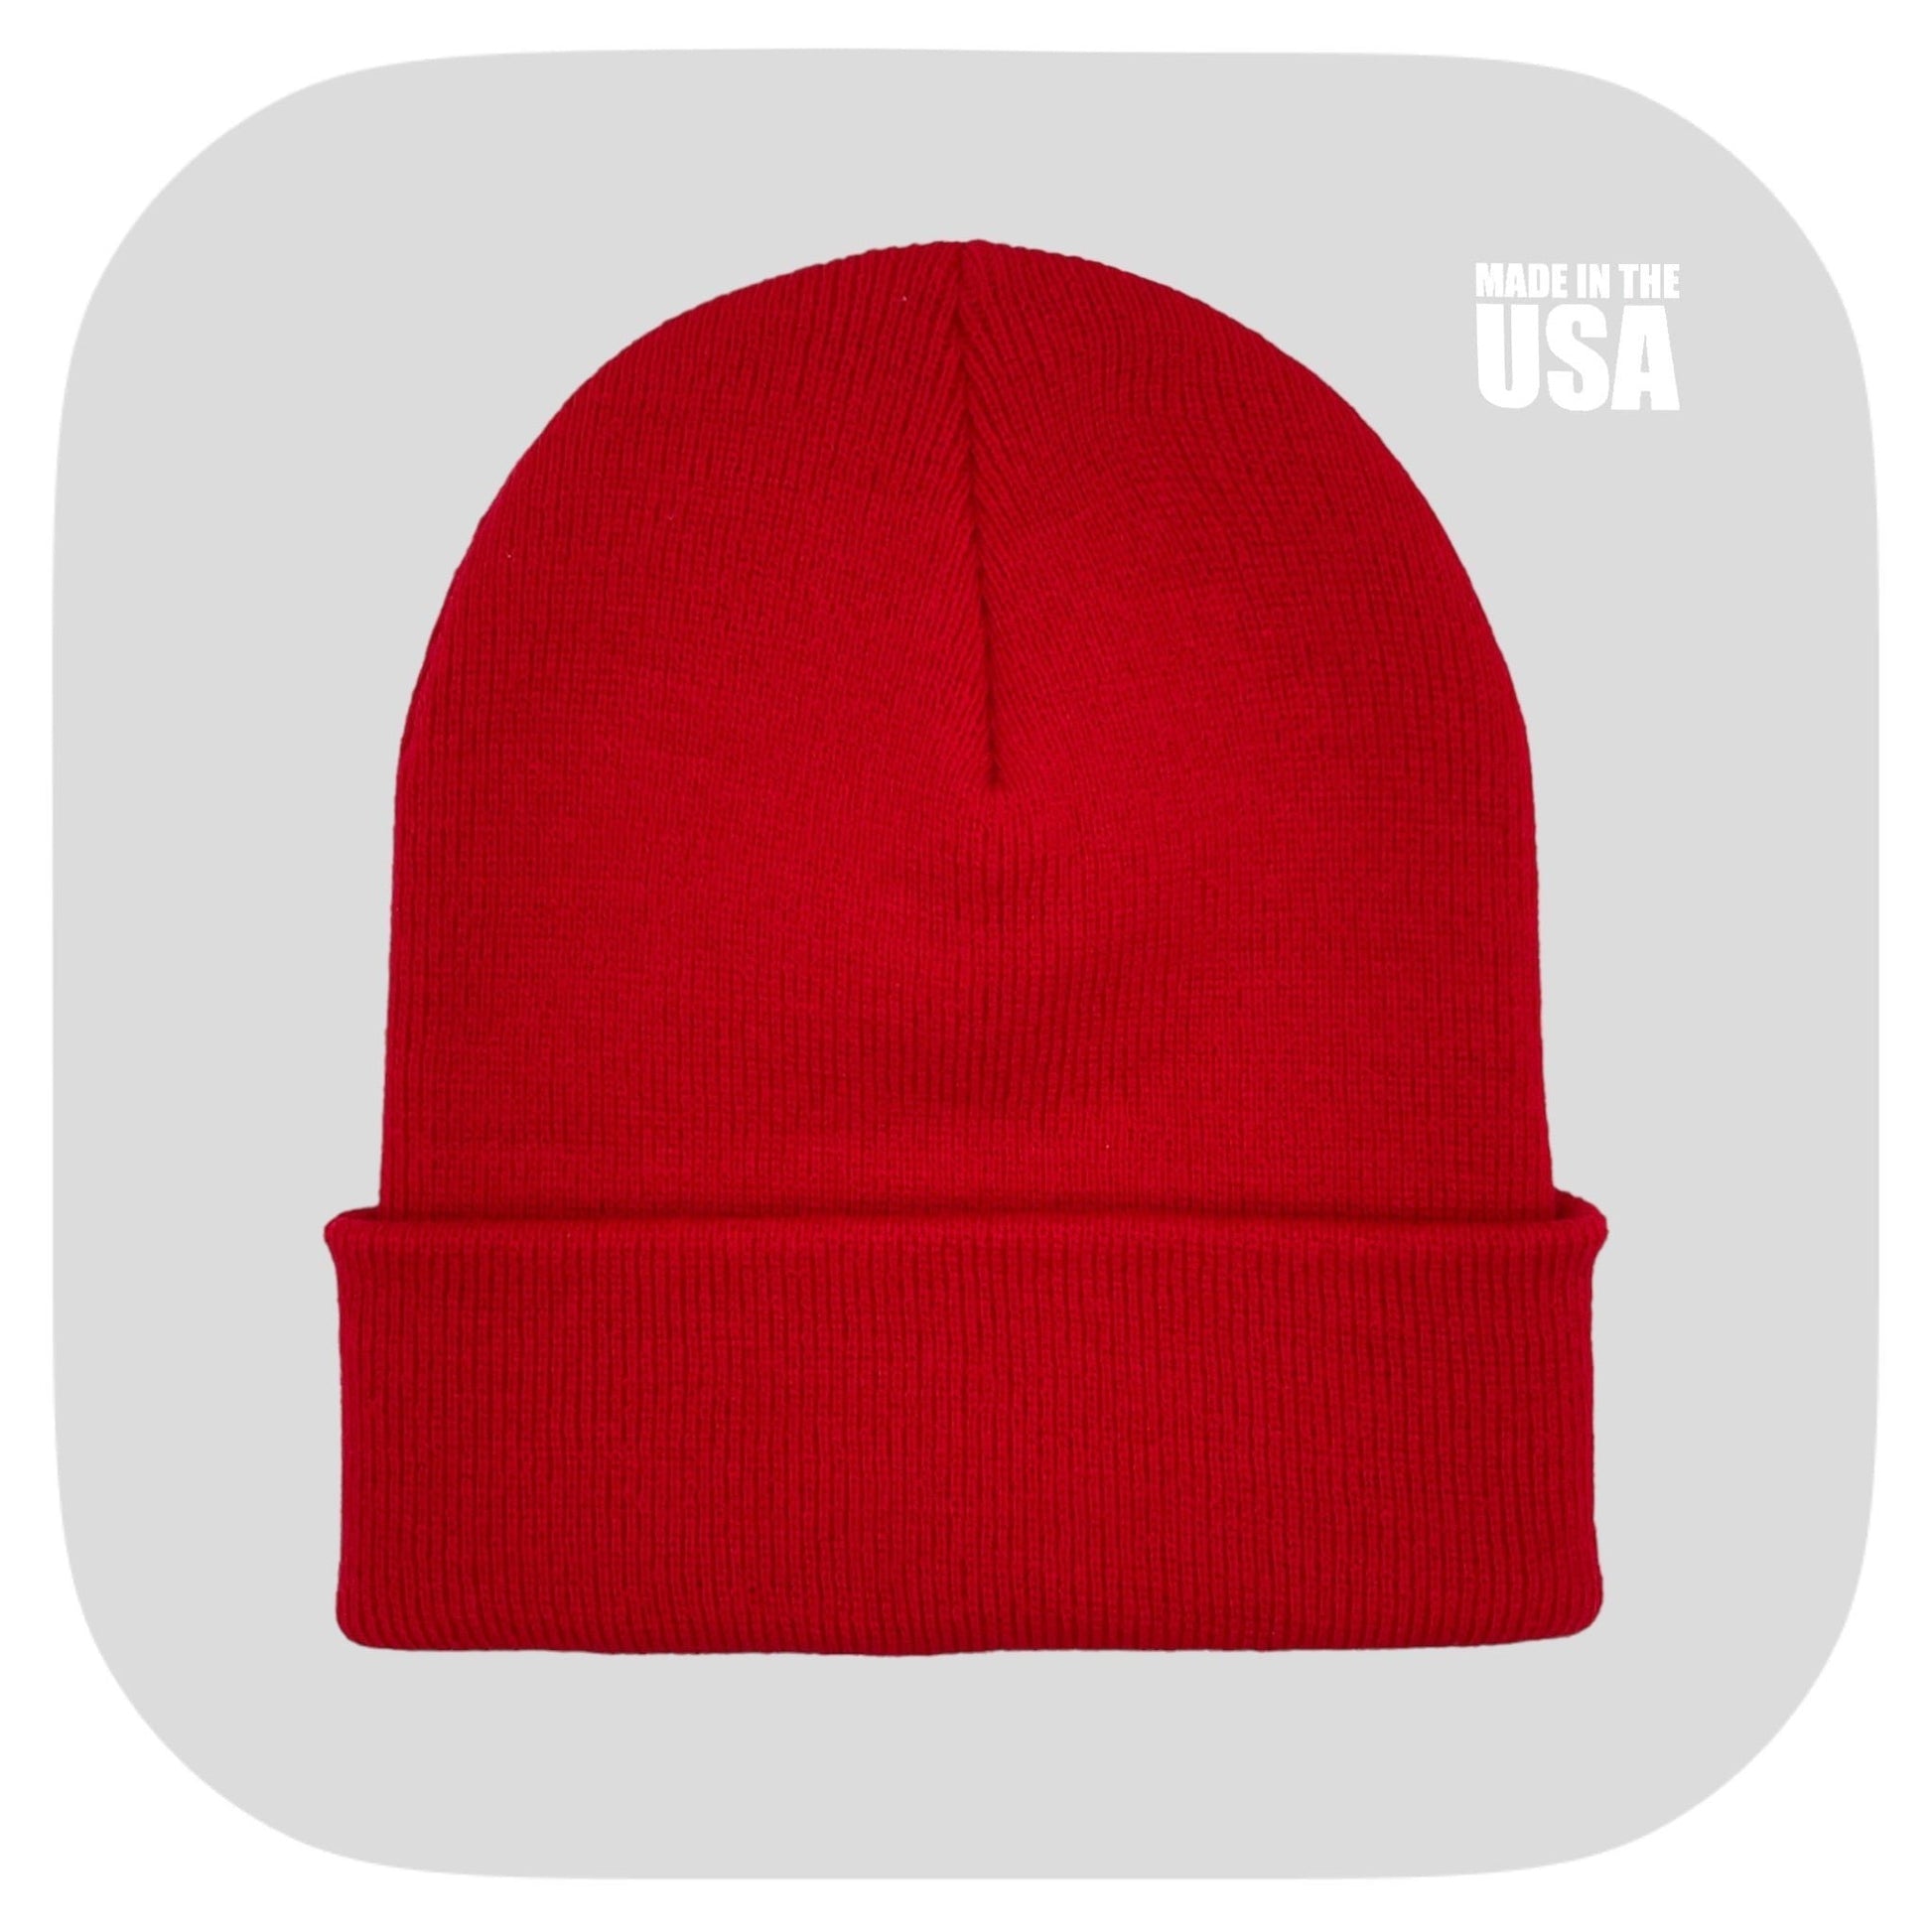 Blank Beanie Factory Cuffed Winter Hat, Wholesale price, Premium Quality, Brown, Made in U.S.A - The Beanie Factory